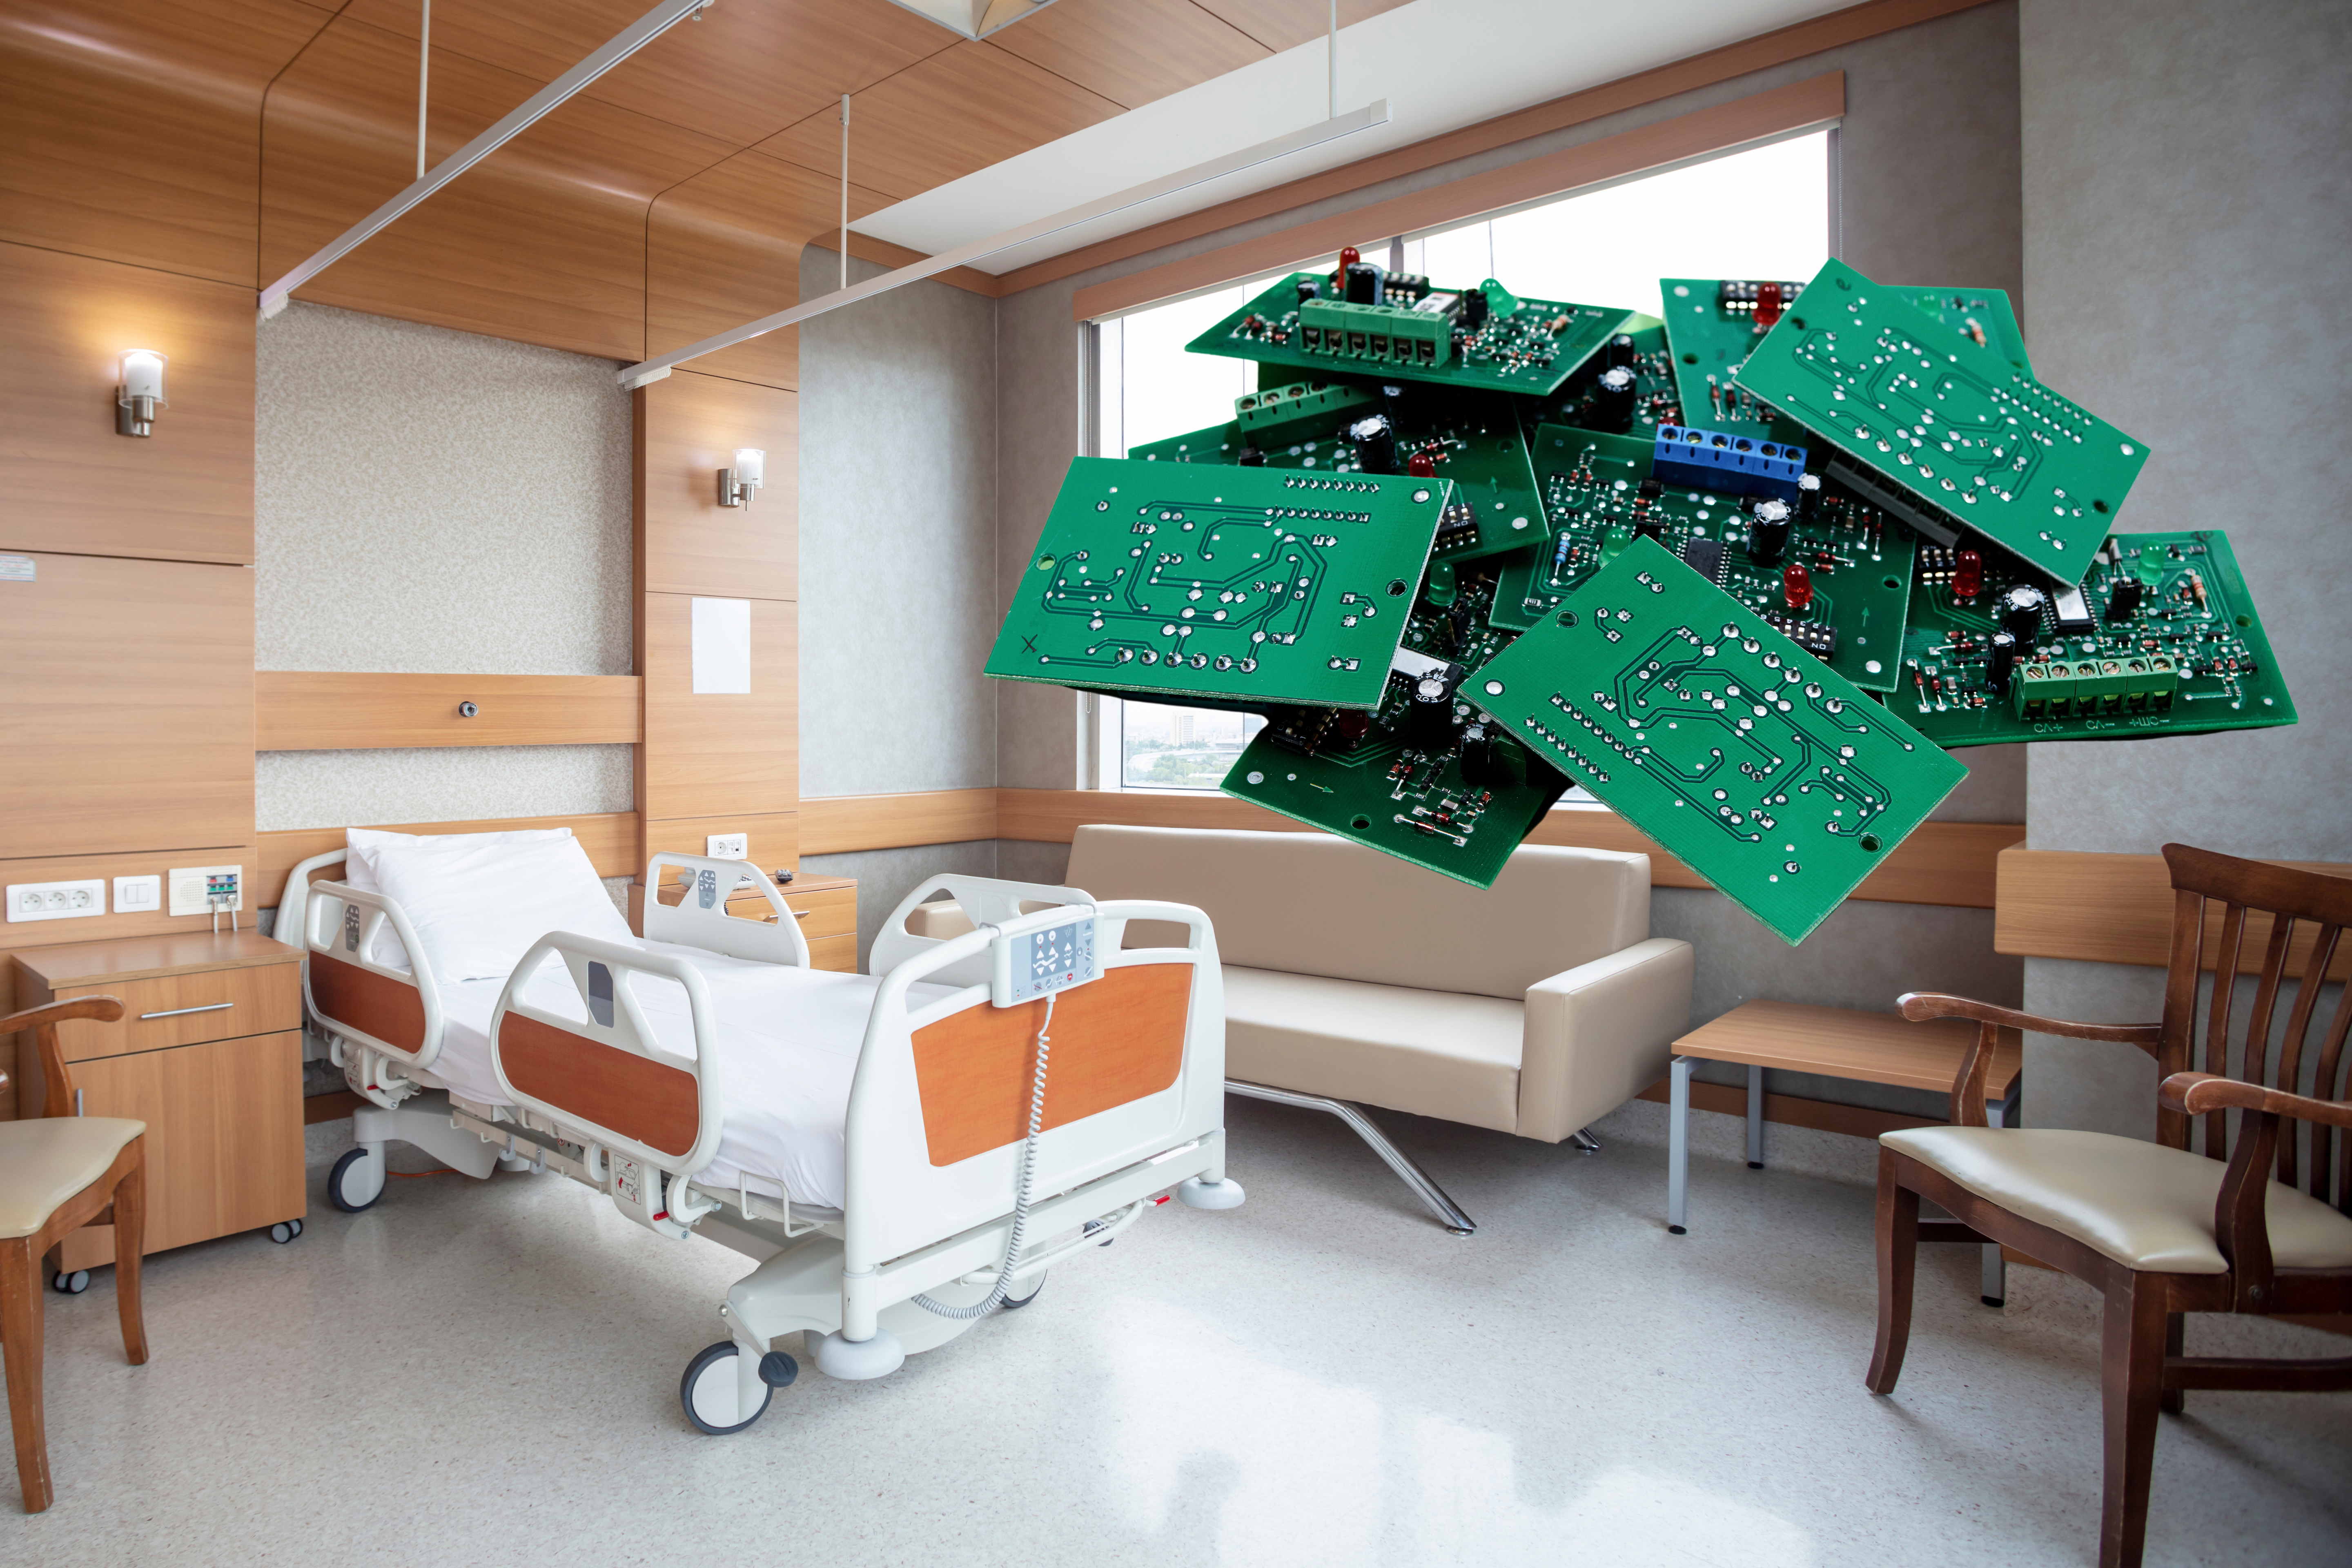 hospital room with an edited in printed circuit board